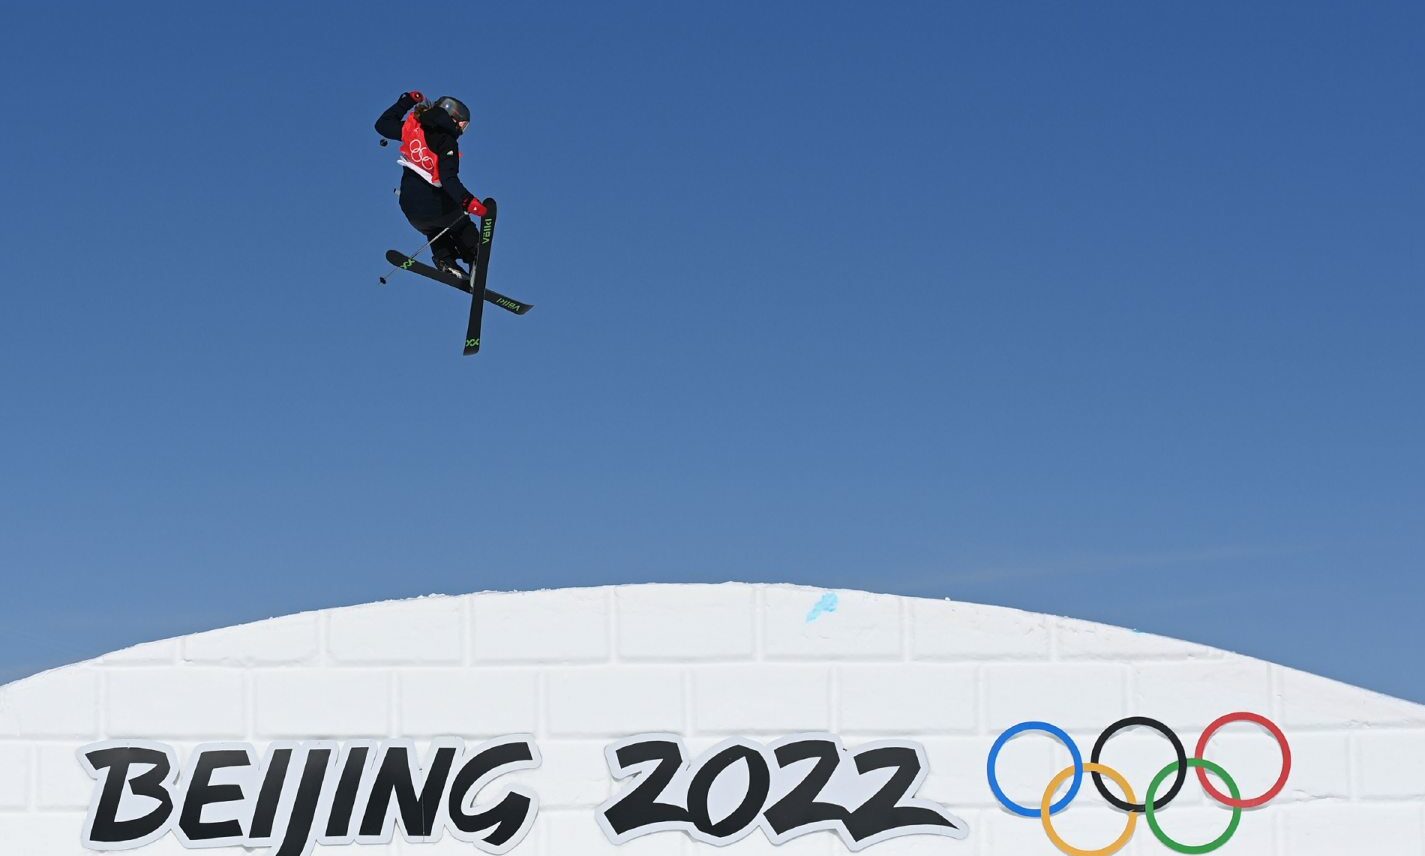 Aberdeen's Kirsty Muir in action in the Women's Freeski Slopestyle Qualification during the Winter Olympics. Photo credit: Angelika Warmuth/PA